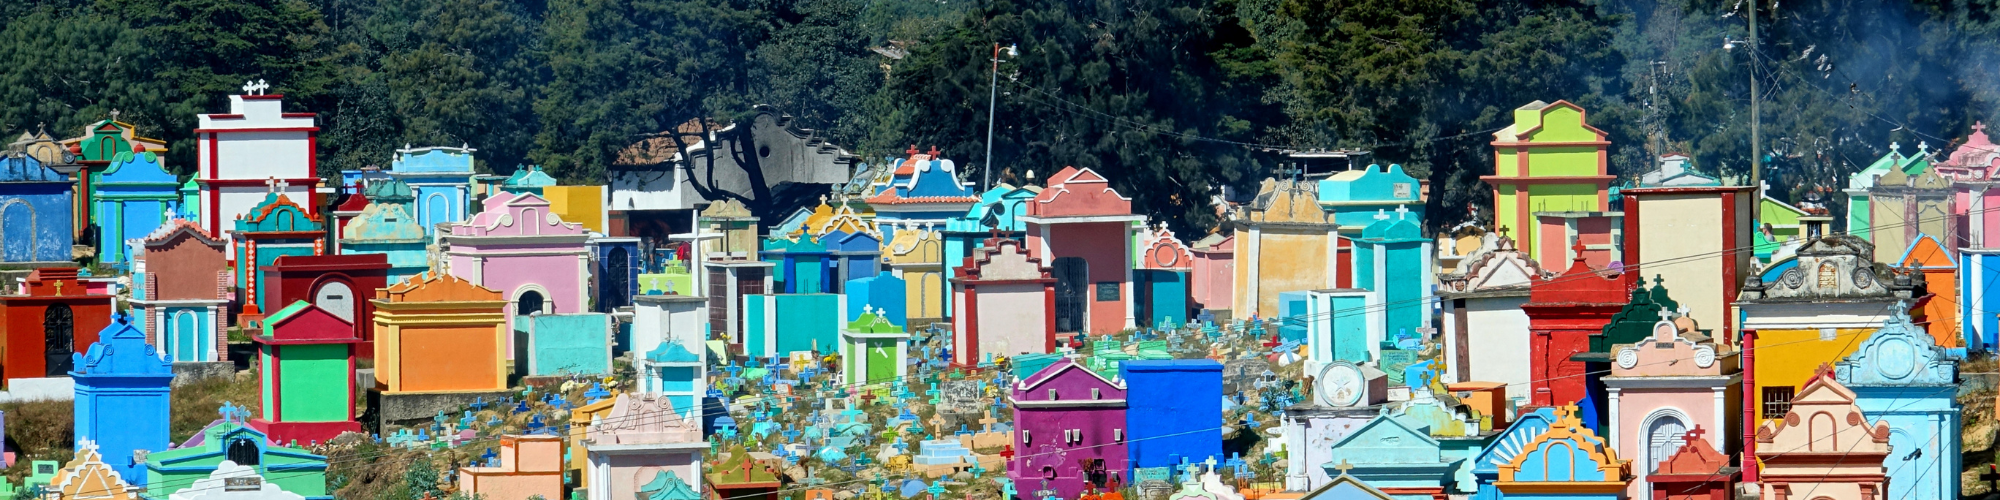 a colorful cemetery in guatemala with painted tombstones